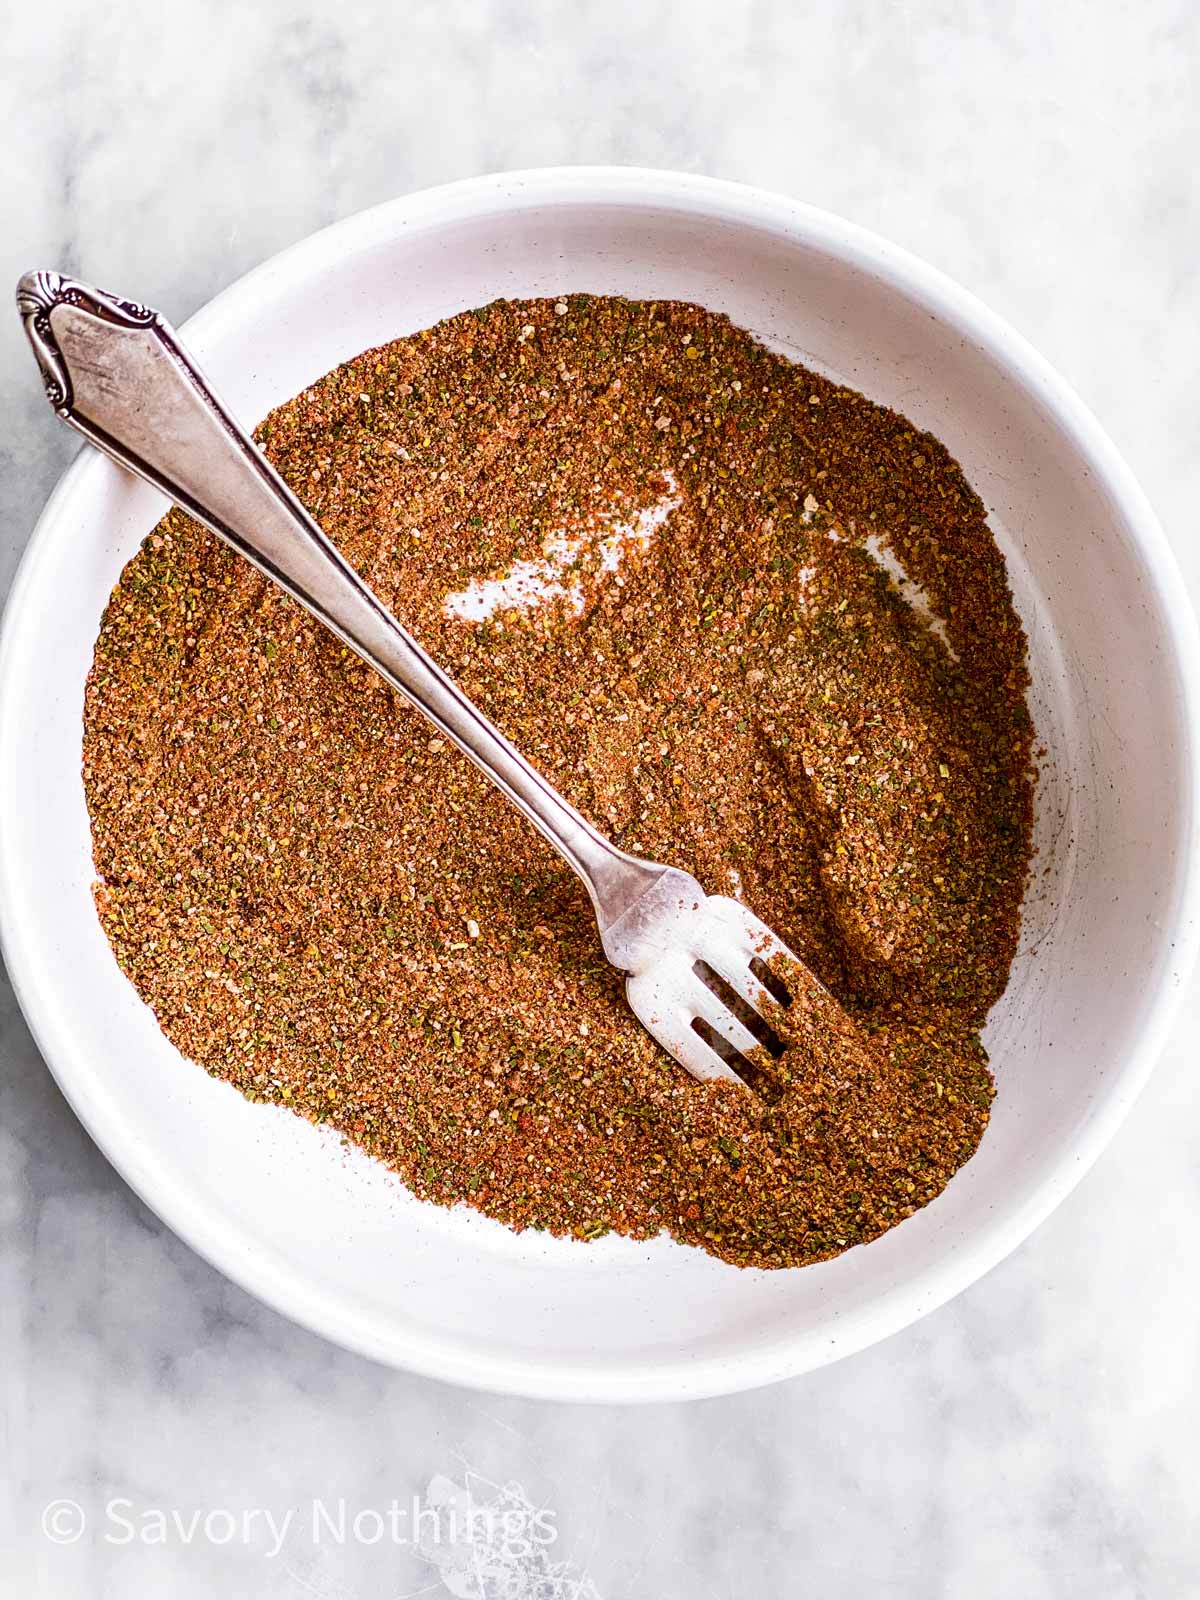 Old Bay Seasoning Recipe (for an Easy Homemade Copycat)